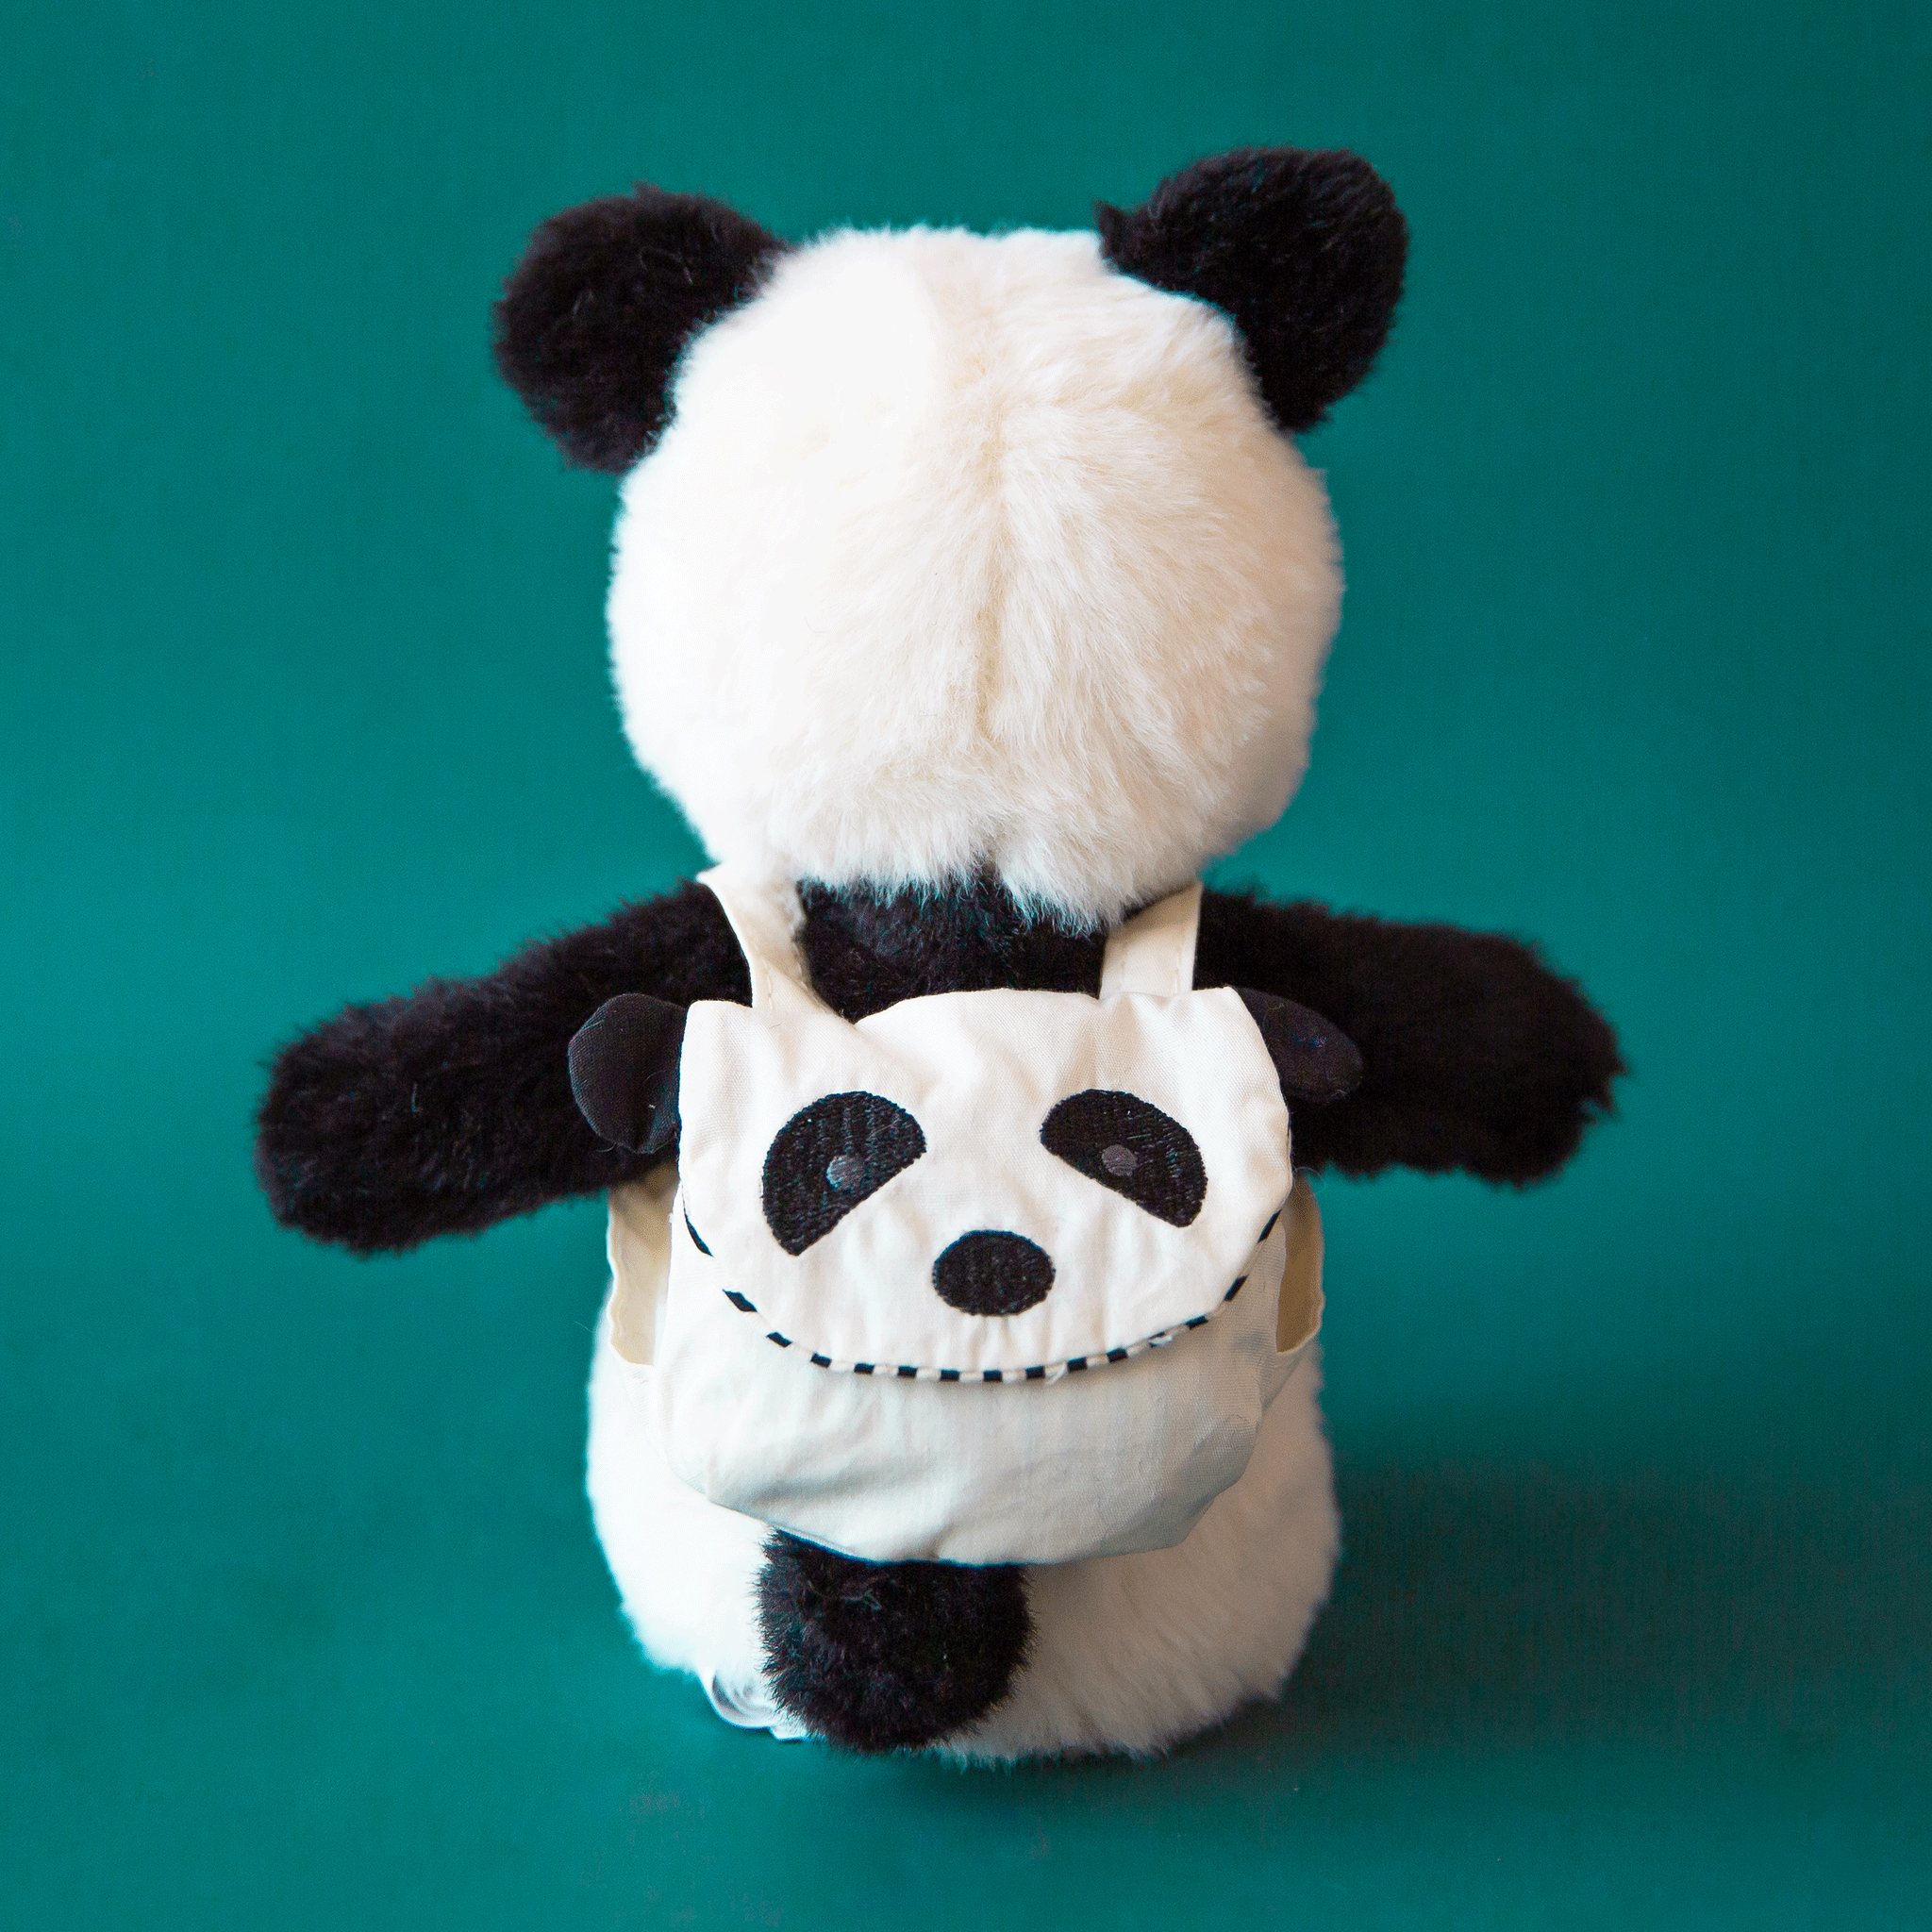 On a teal background is a black and white panda stuffed toy wearing a panda backpack.